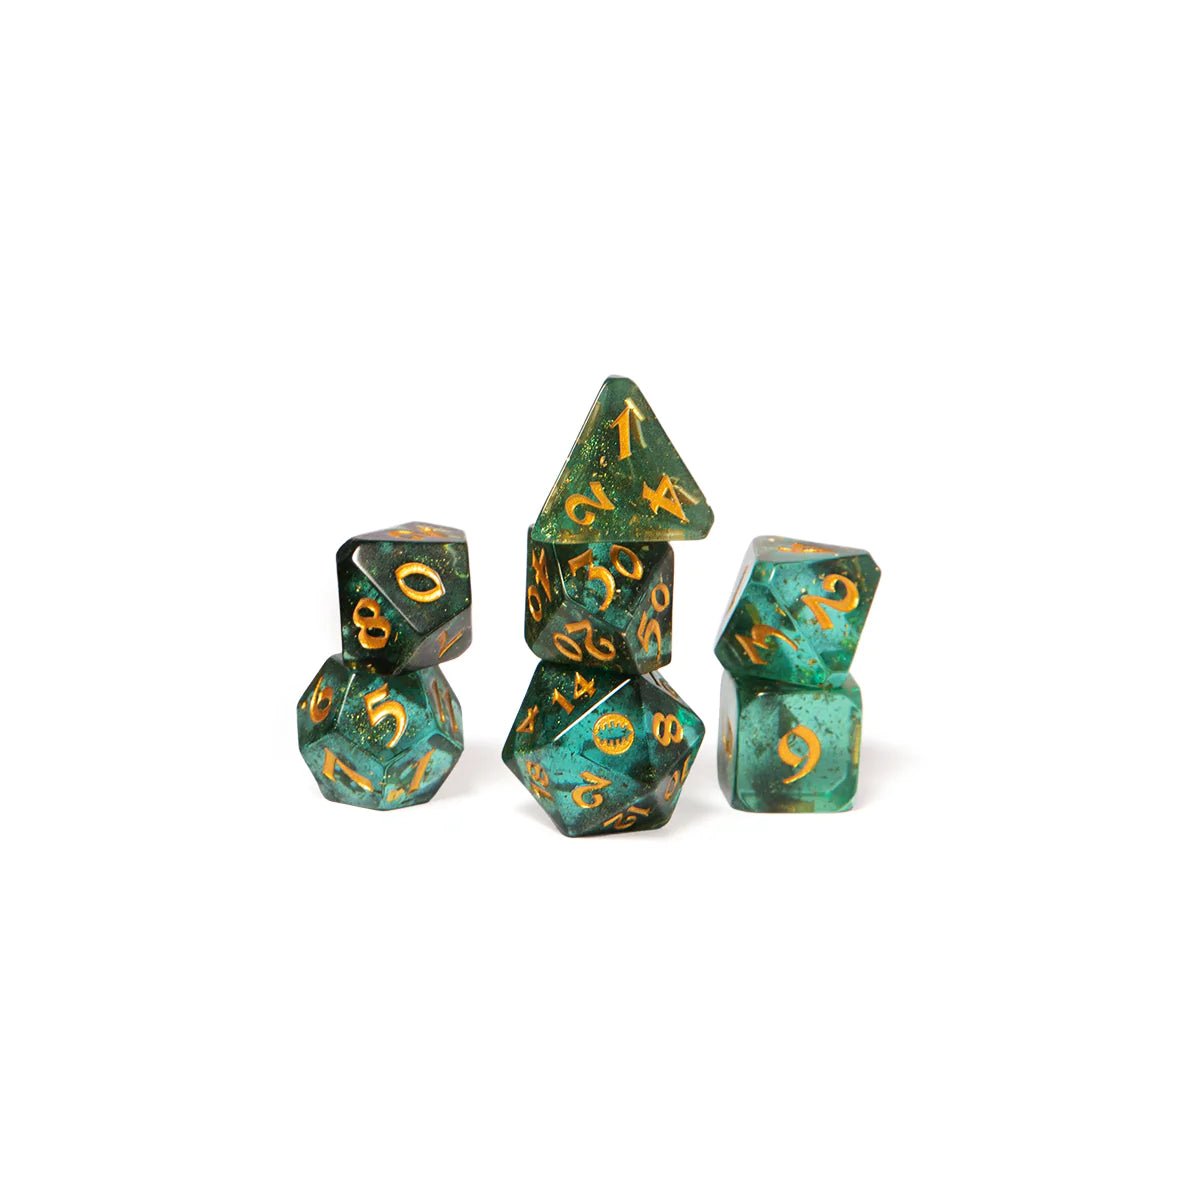 Mighty Nein Dice Set: Fjord Stone (Brown/Green) - The Fourth Place